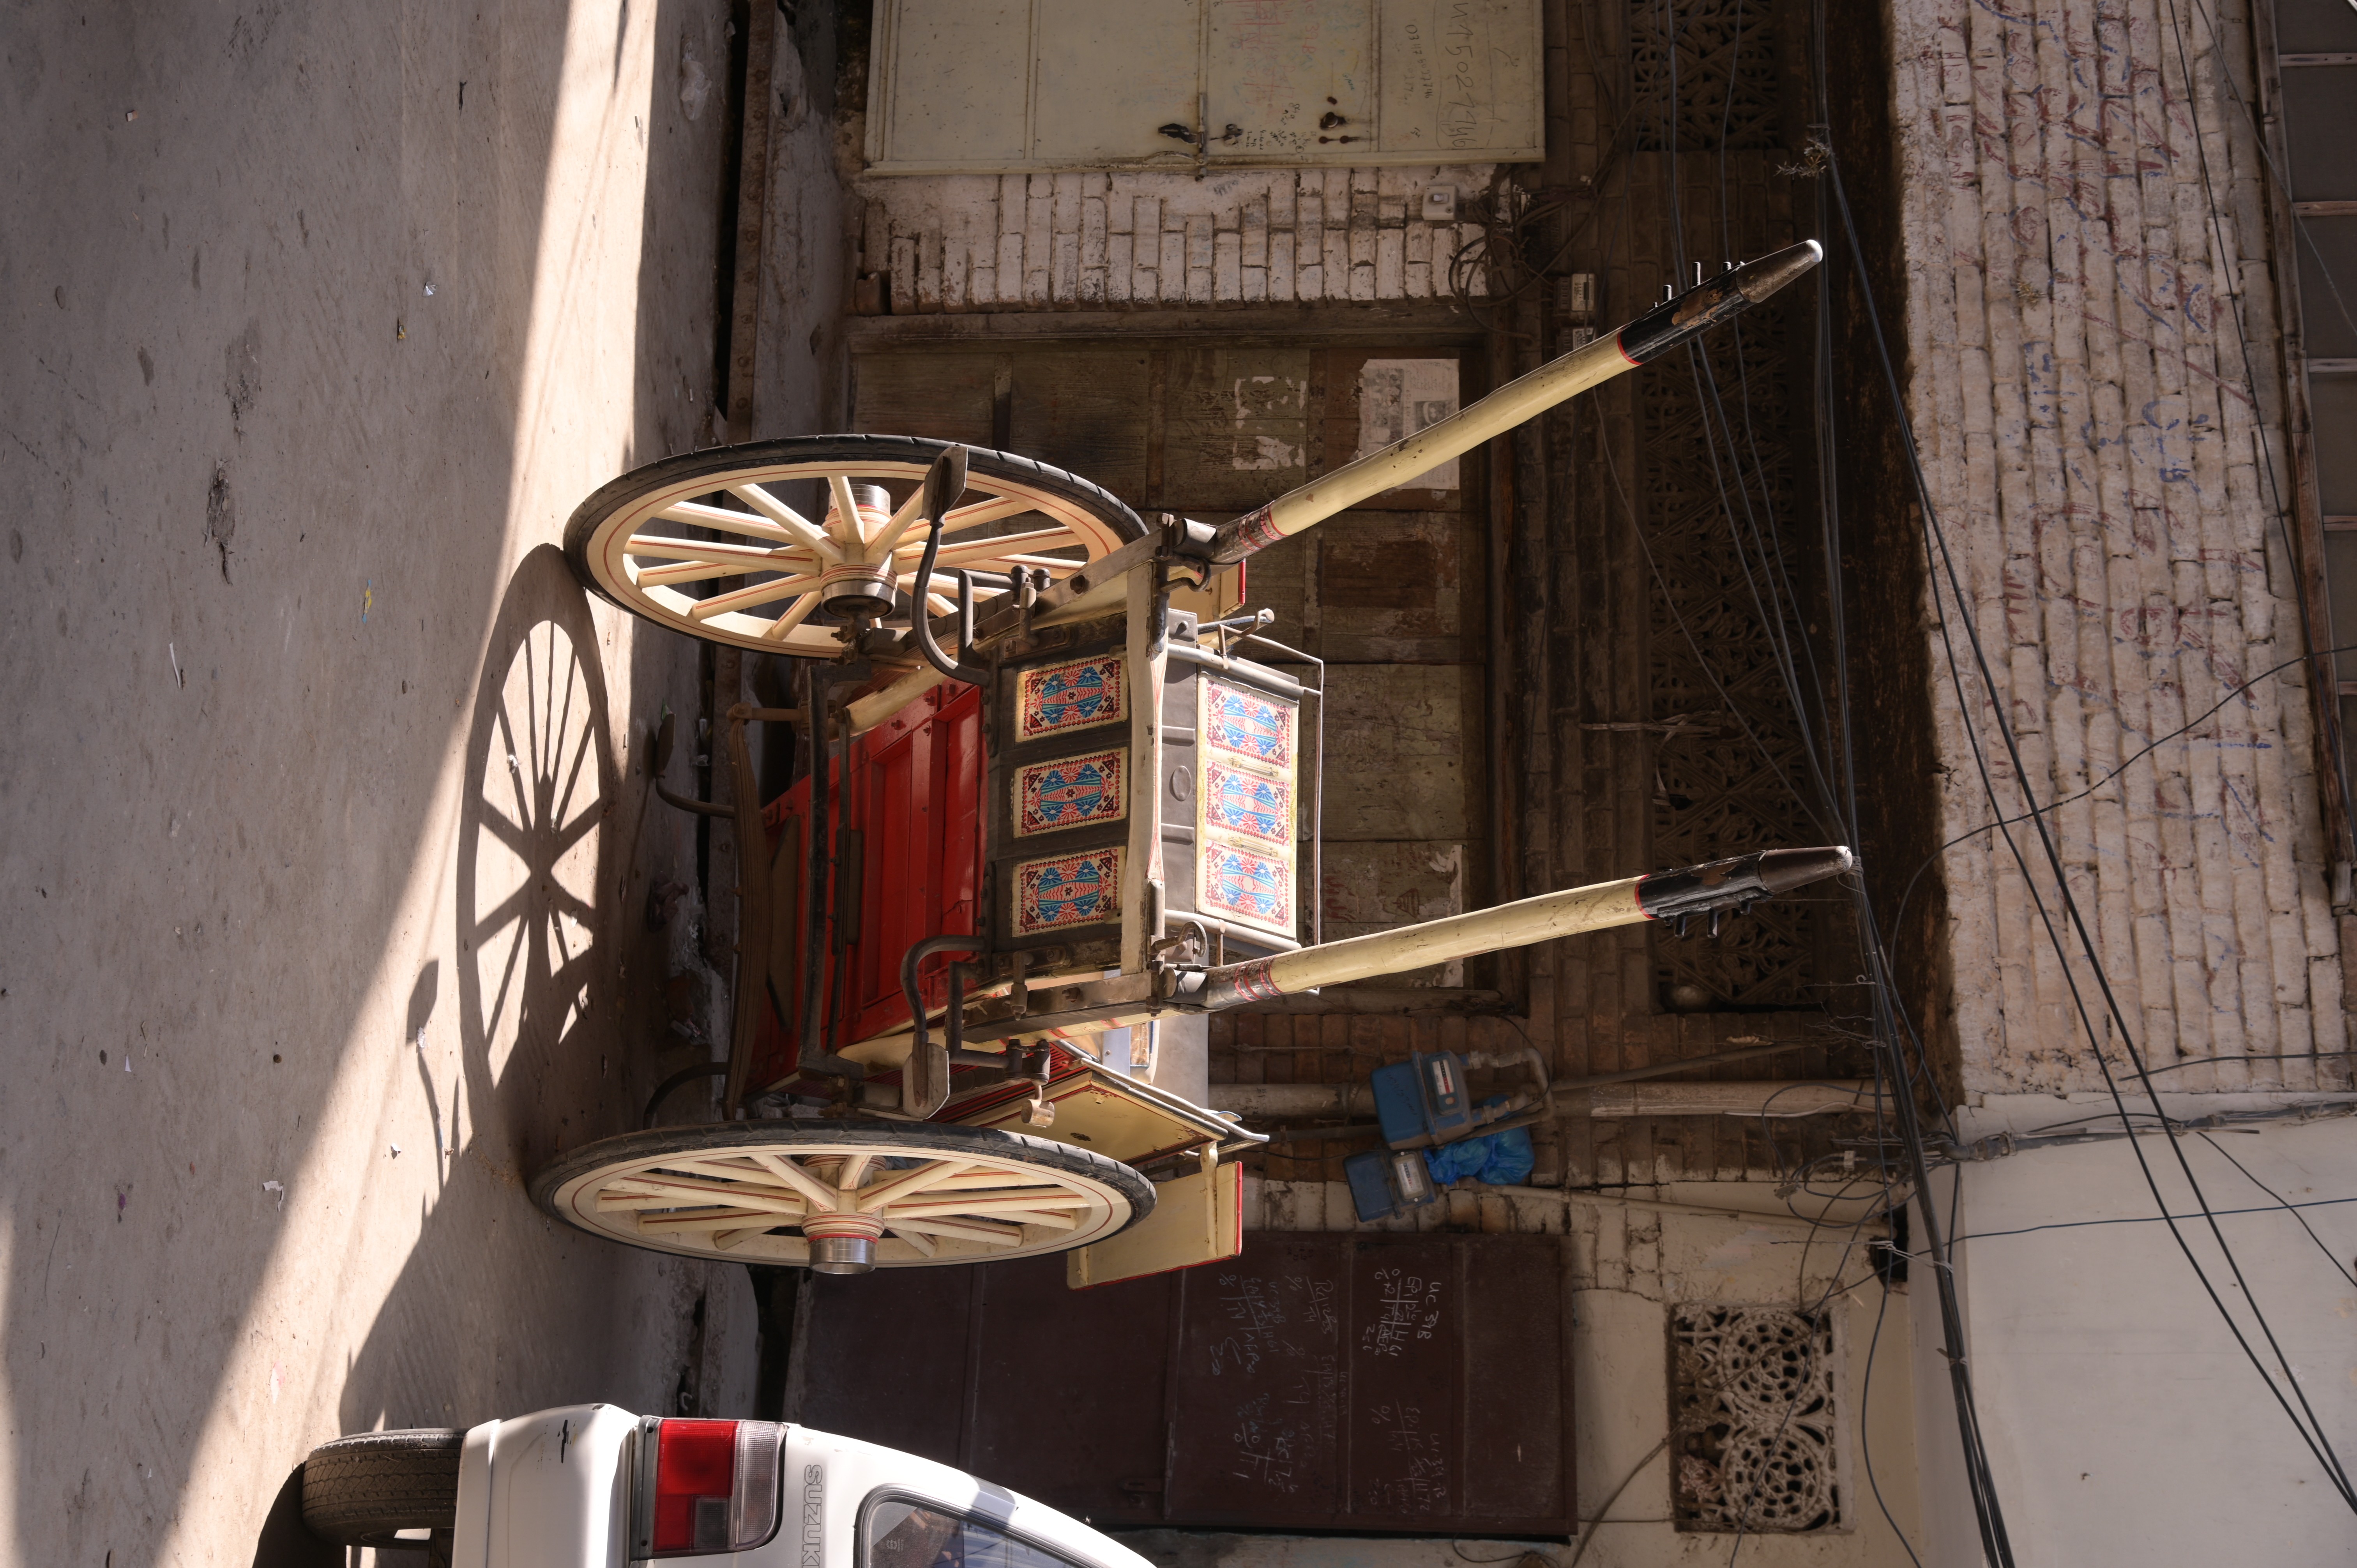 A man push cart on which people travel across the city